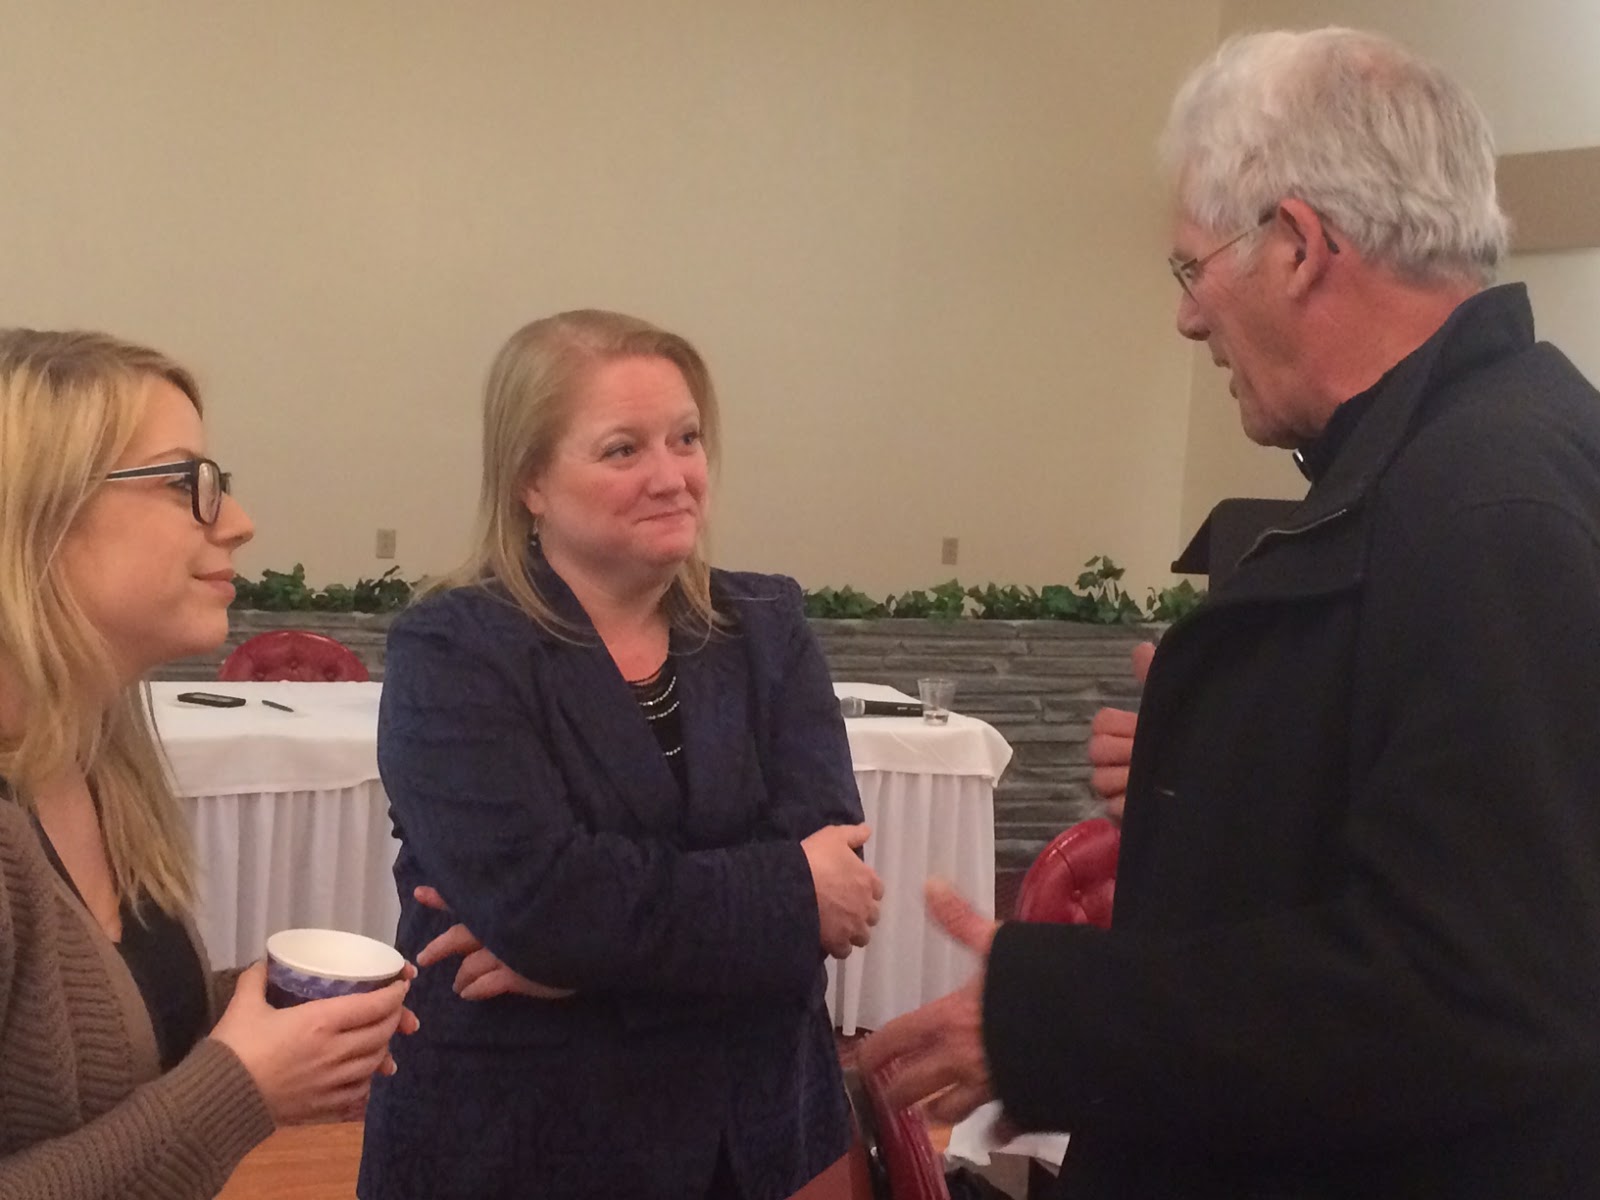 Assemblywoman Addie A.E. Jenne has been brainstorming with college officials from around the North Country about increasing opportunities for students interested in employment in the maritime-related economy in the North Country.